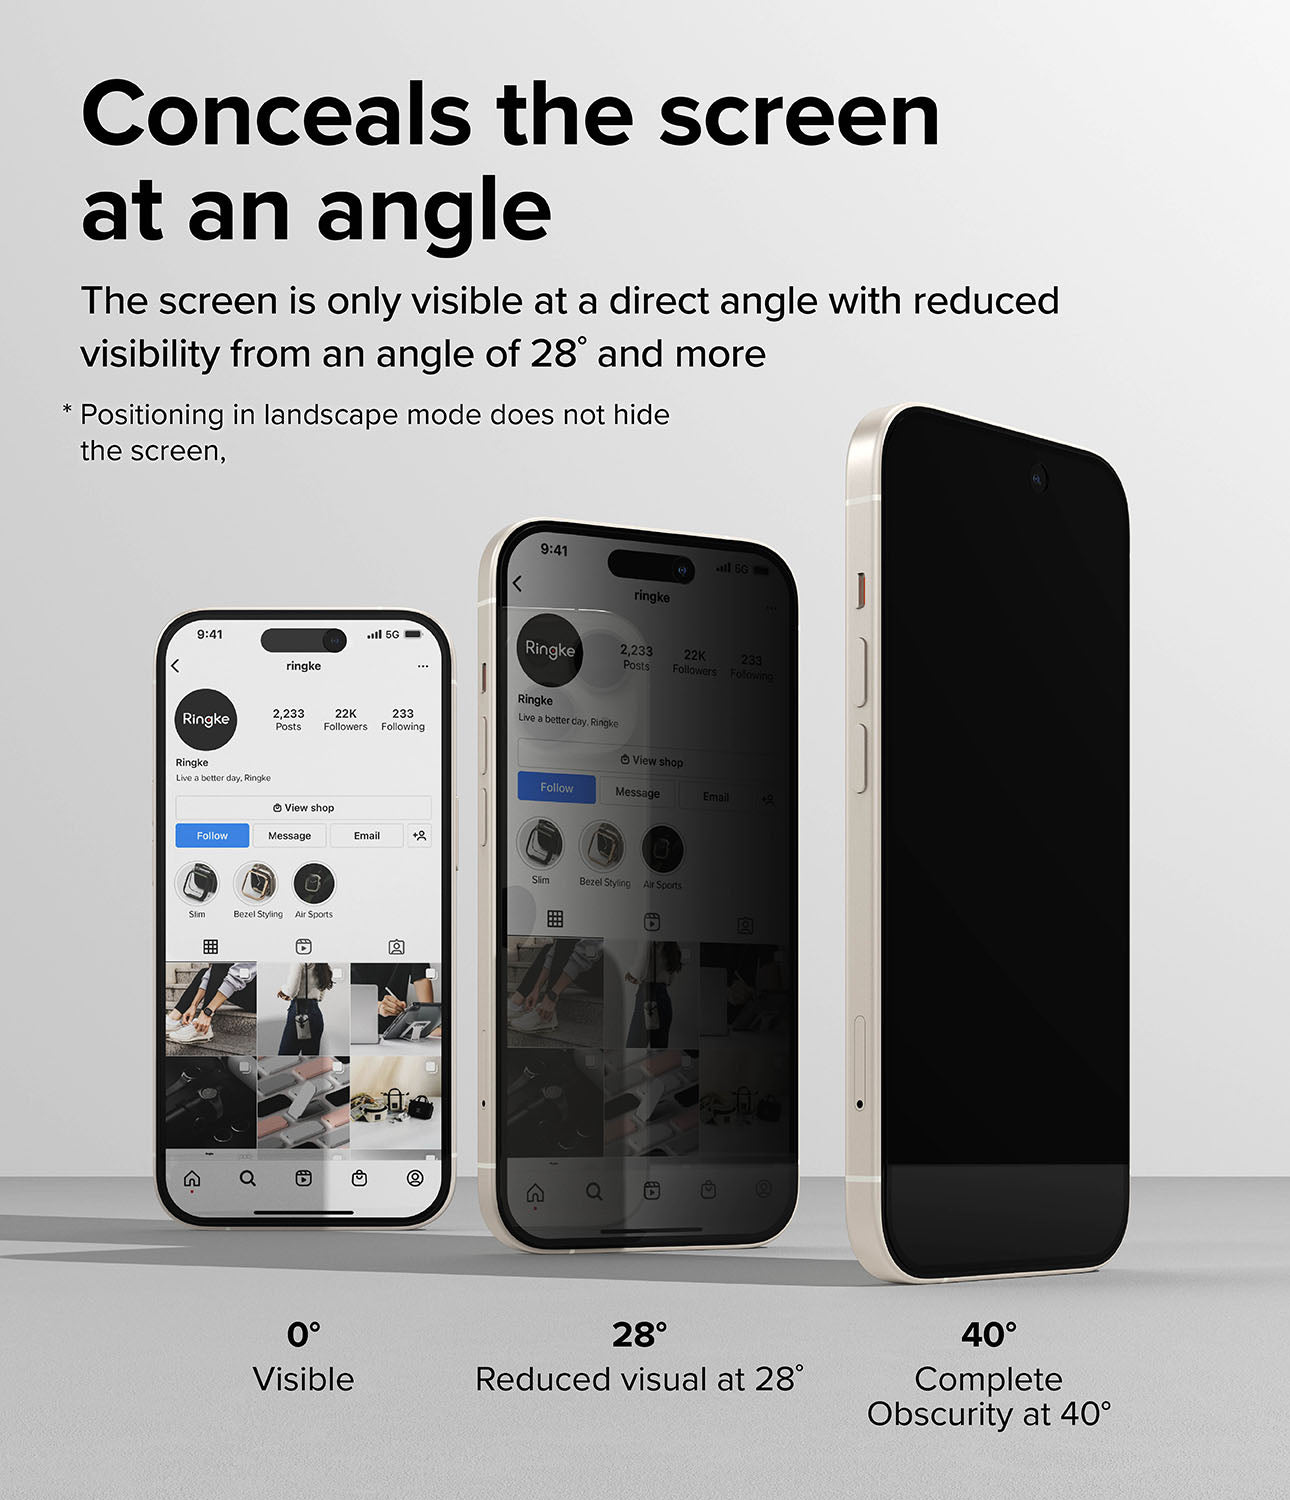 iPhone 15 Plus Screen Protector | Privacy Glass - Conceals the scree at an angle. The screen is only visible at a direct angle with reduced visibility from an angle of 28 degrees and more. Positioning in landscape mode does not hide the screen.